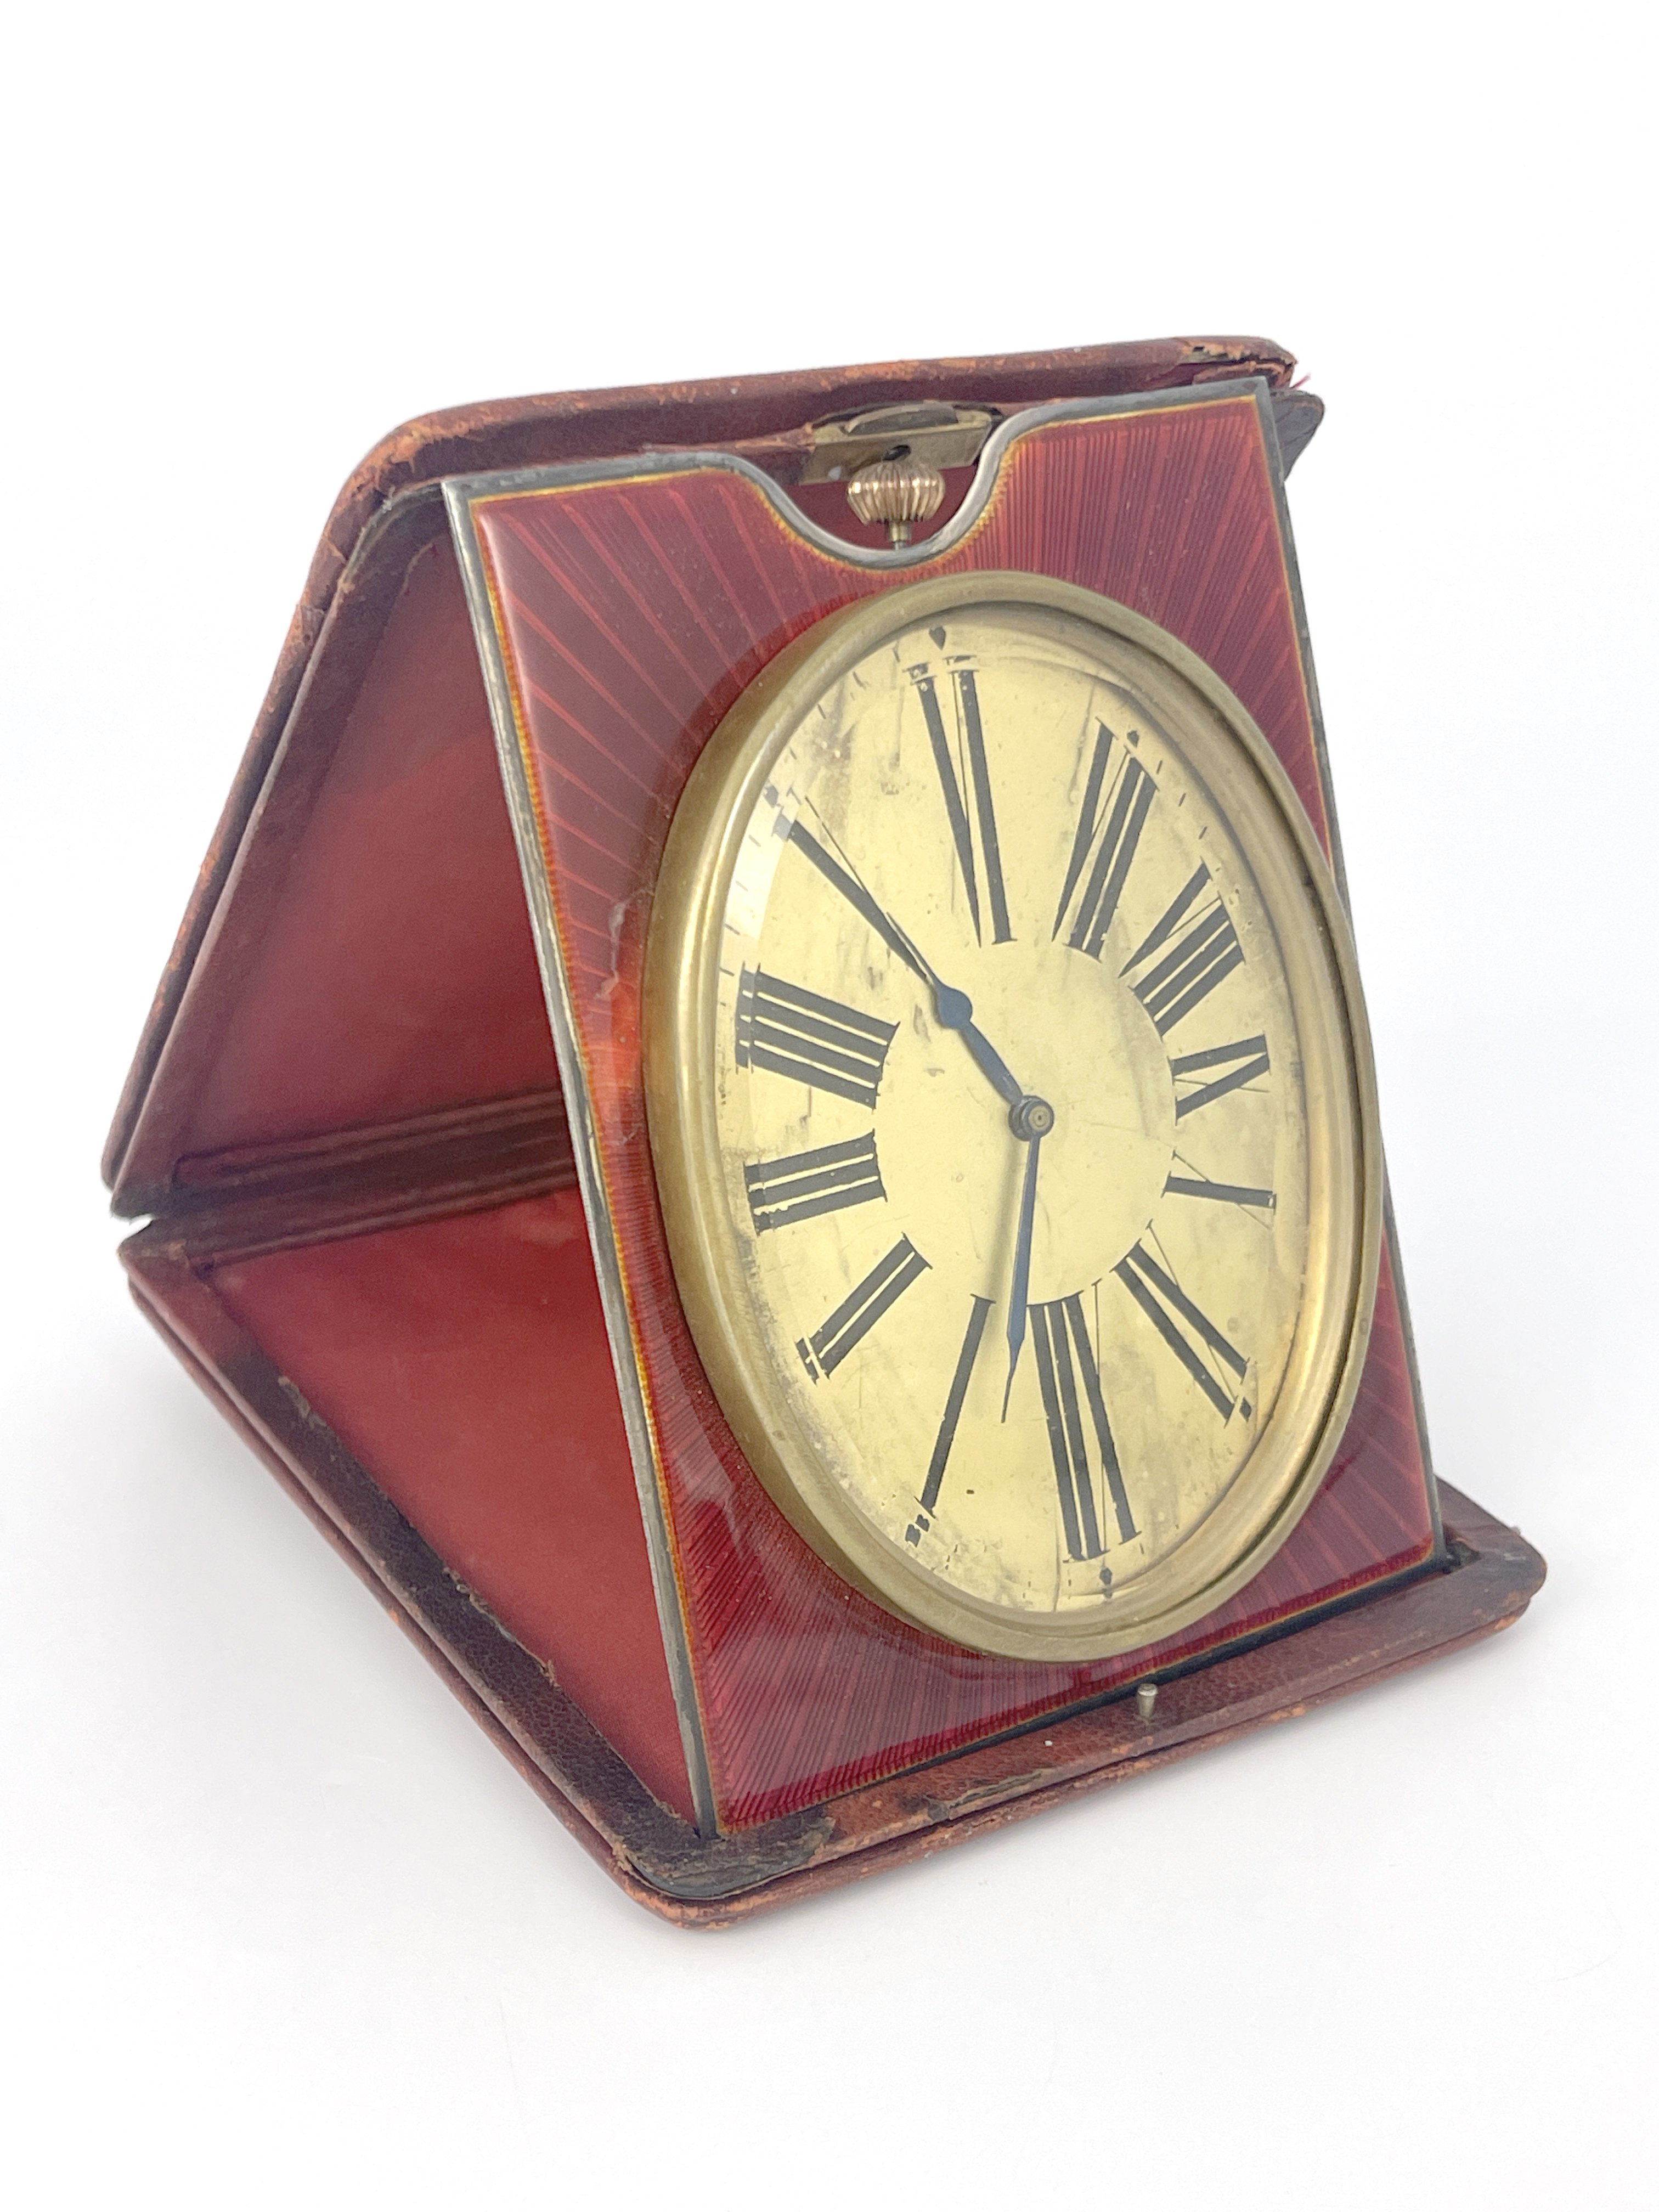 An easel travel timepiece, early 20th Century, red leather outer case, oval gilt dial with Roman